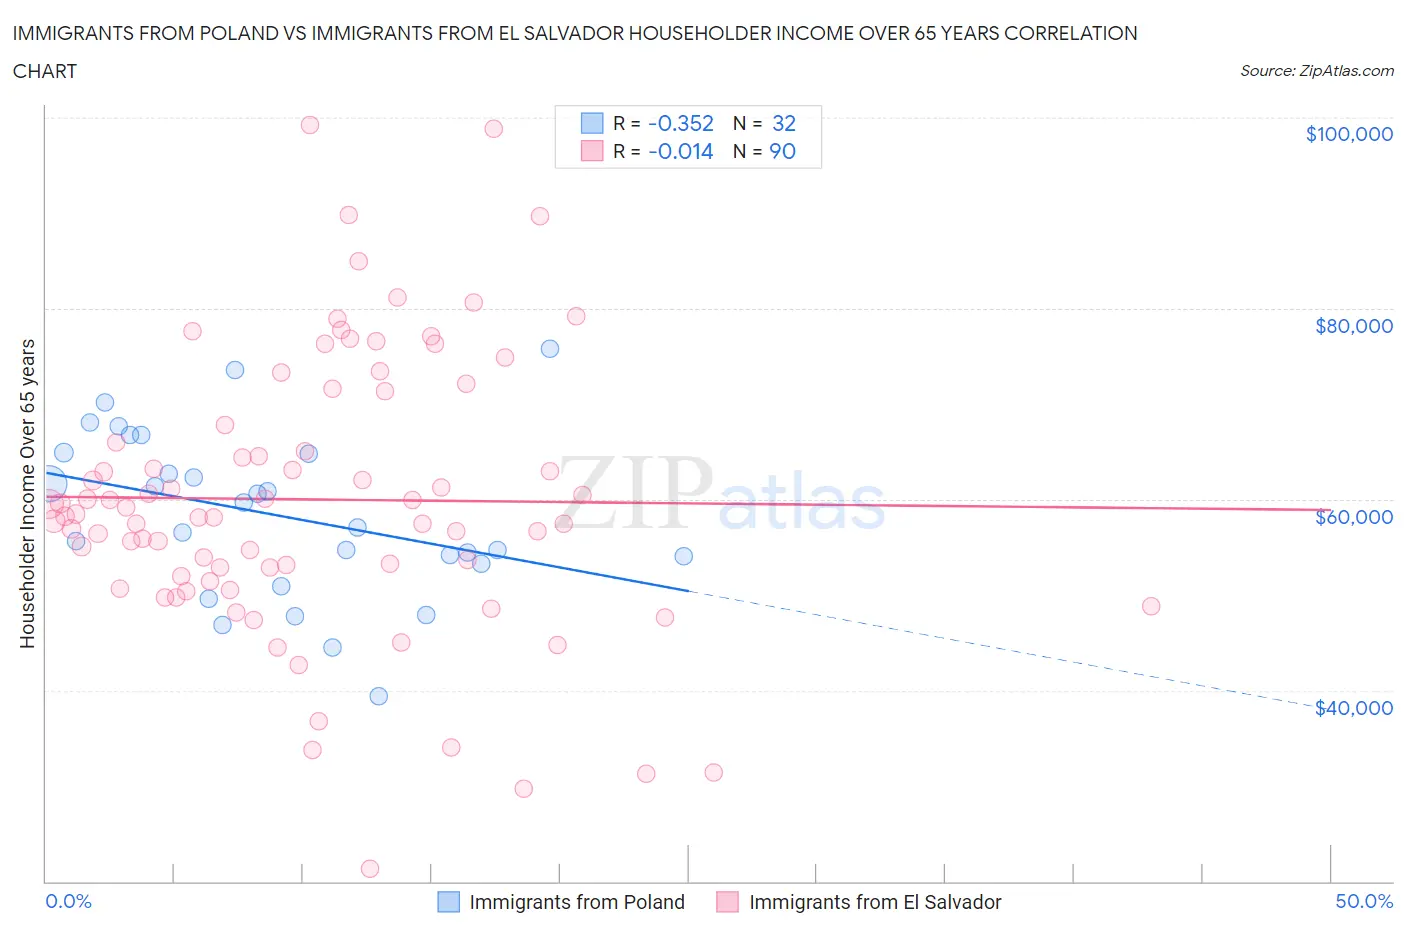 Immigrants from Poland vs Immigrants from El Salvador Householder Income Over 65 years